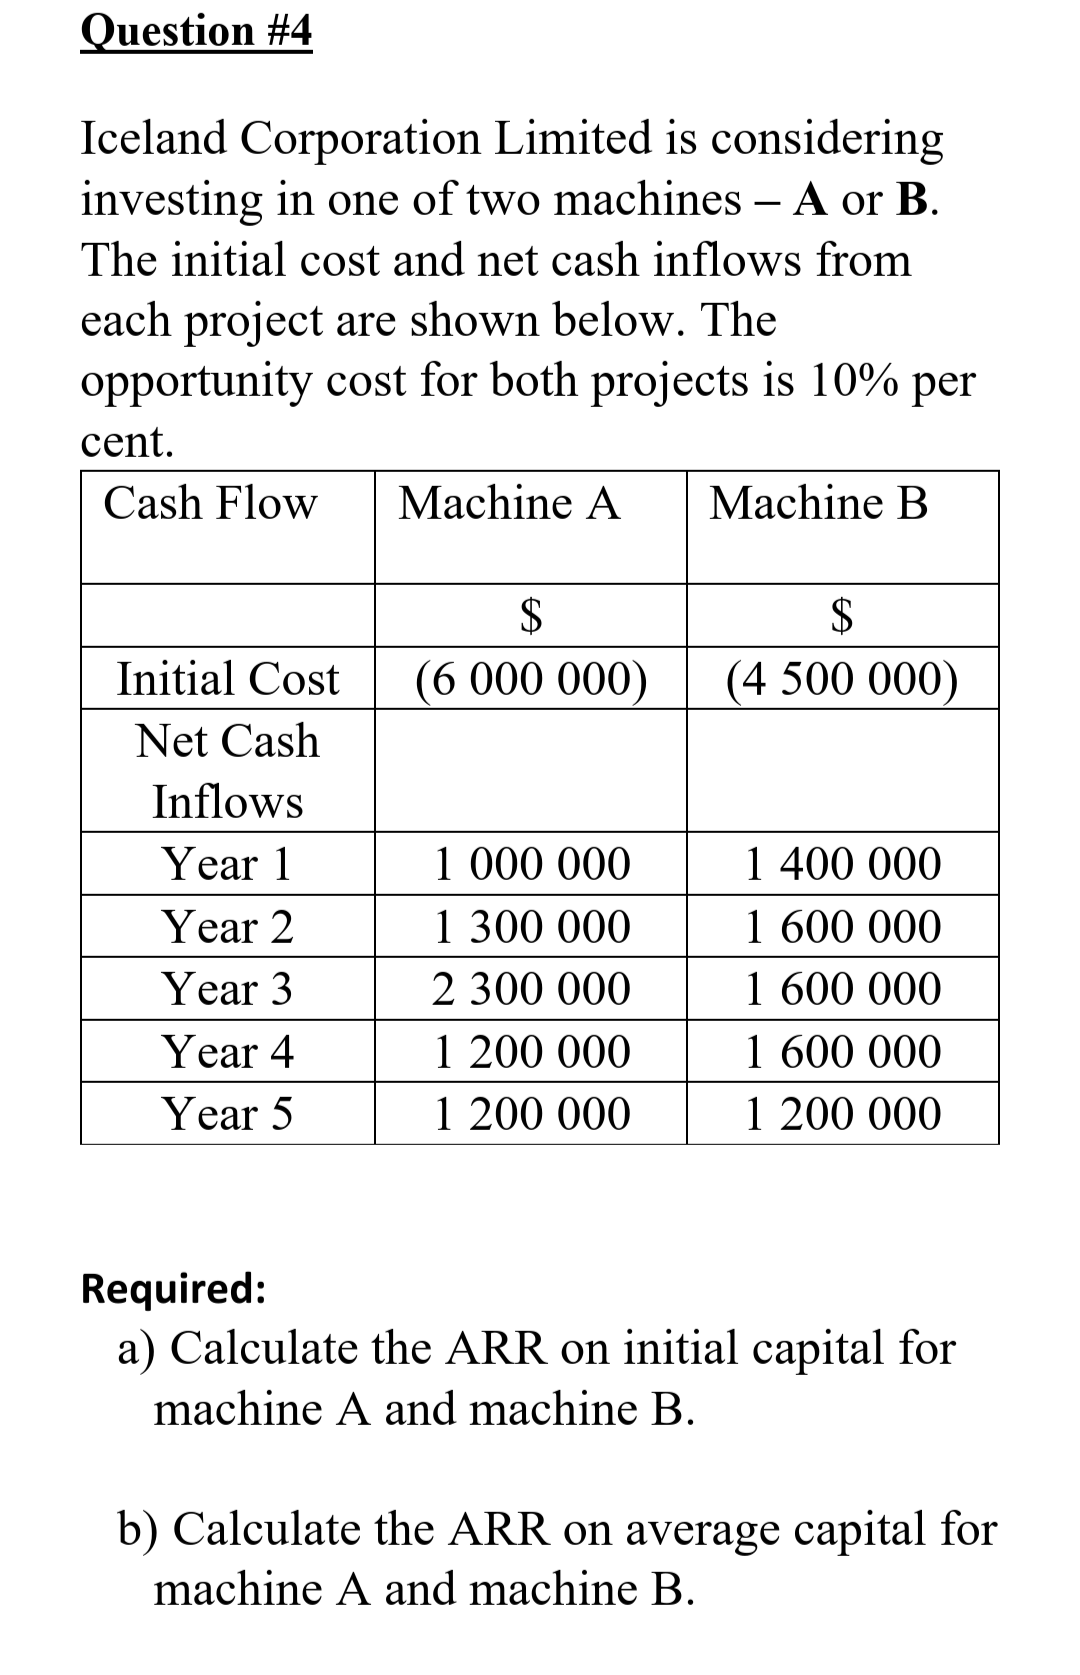 Question #4
Iceland Corporation Limited is considering
investing in one of two machines – A or B.
The initial cost and net cash inflows from
each project are shown below. The
opportunity cost for both projects is 10% per
cent.
Cash Flow
Machine A
Machine B
$
2$
Initial Cost
(6 000 000)
(4 500 000)
Net Cash
Inflows
1 000 000
1 300 000
1 400 000
1 600 000
Year 1
Year 2
1 600 000
1 600 000
1 200 000
Year 3
2 300 000
1 200 000
1 200 000
Year 4
Year 5
Required:
a) Calculate the ARR on initial capital for
machine A and machine B.
b) Calculate the ARR on average capital for
machine A and machine B.
